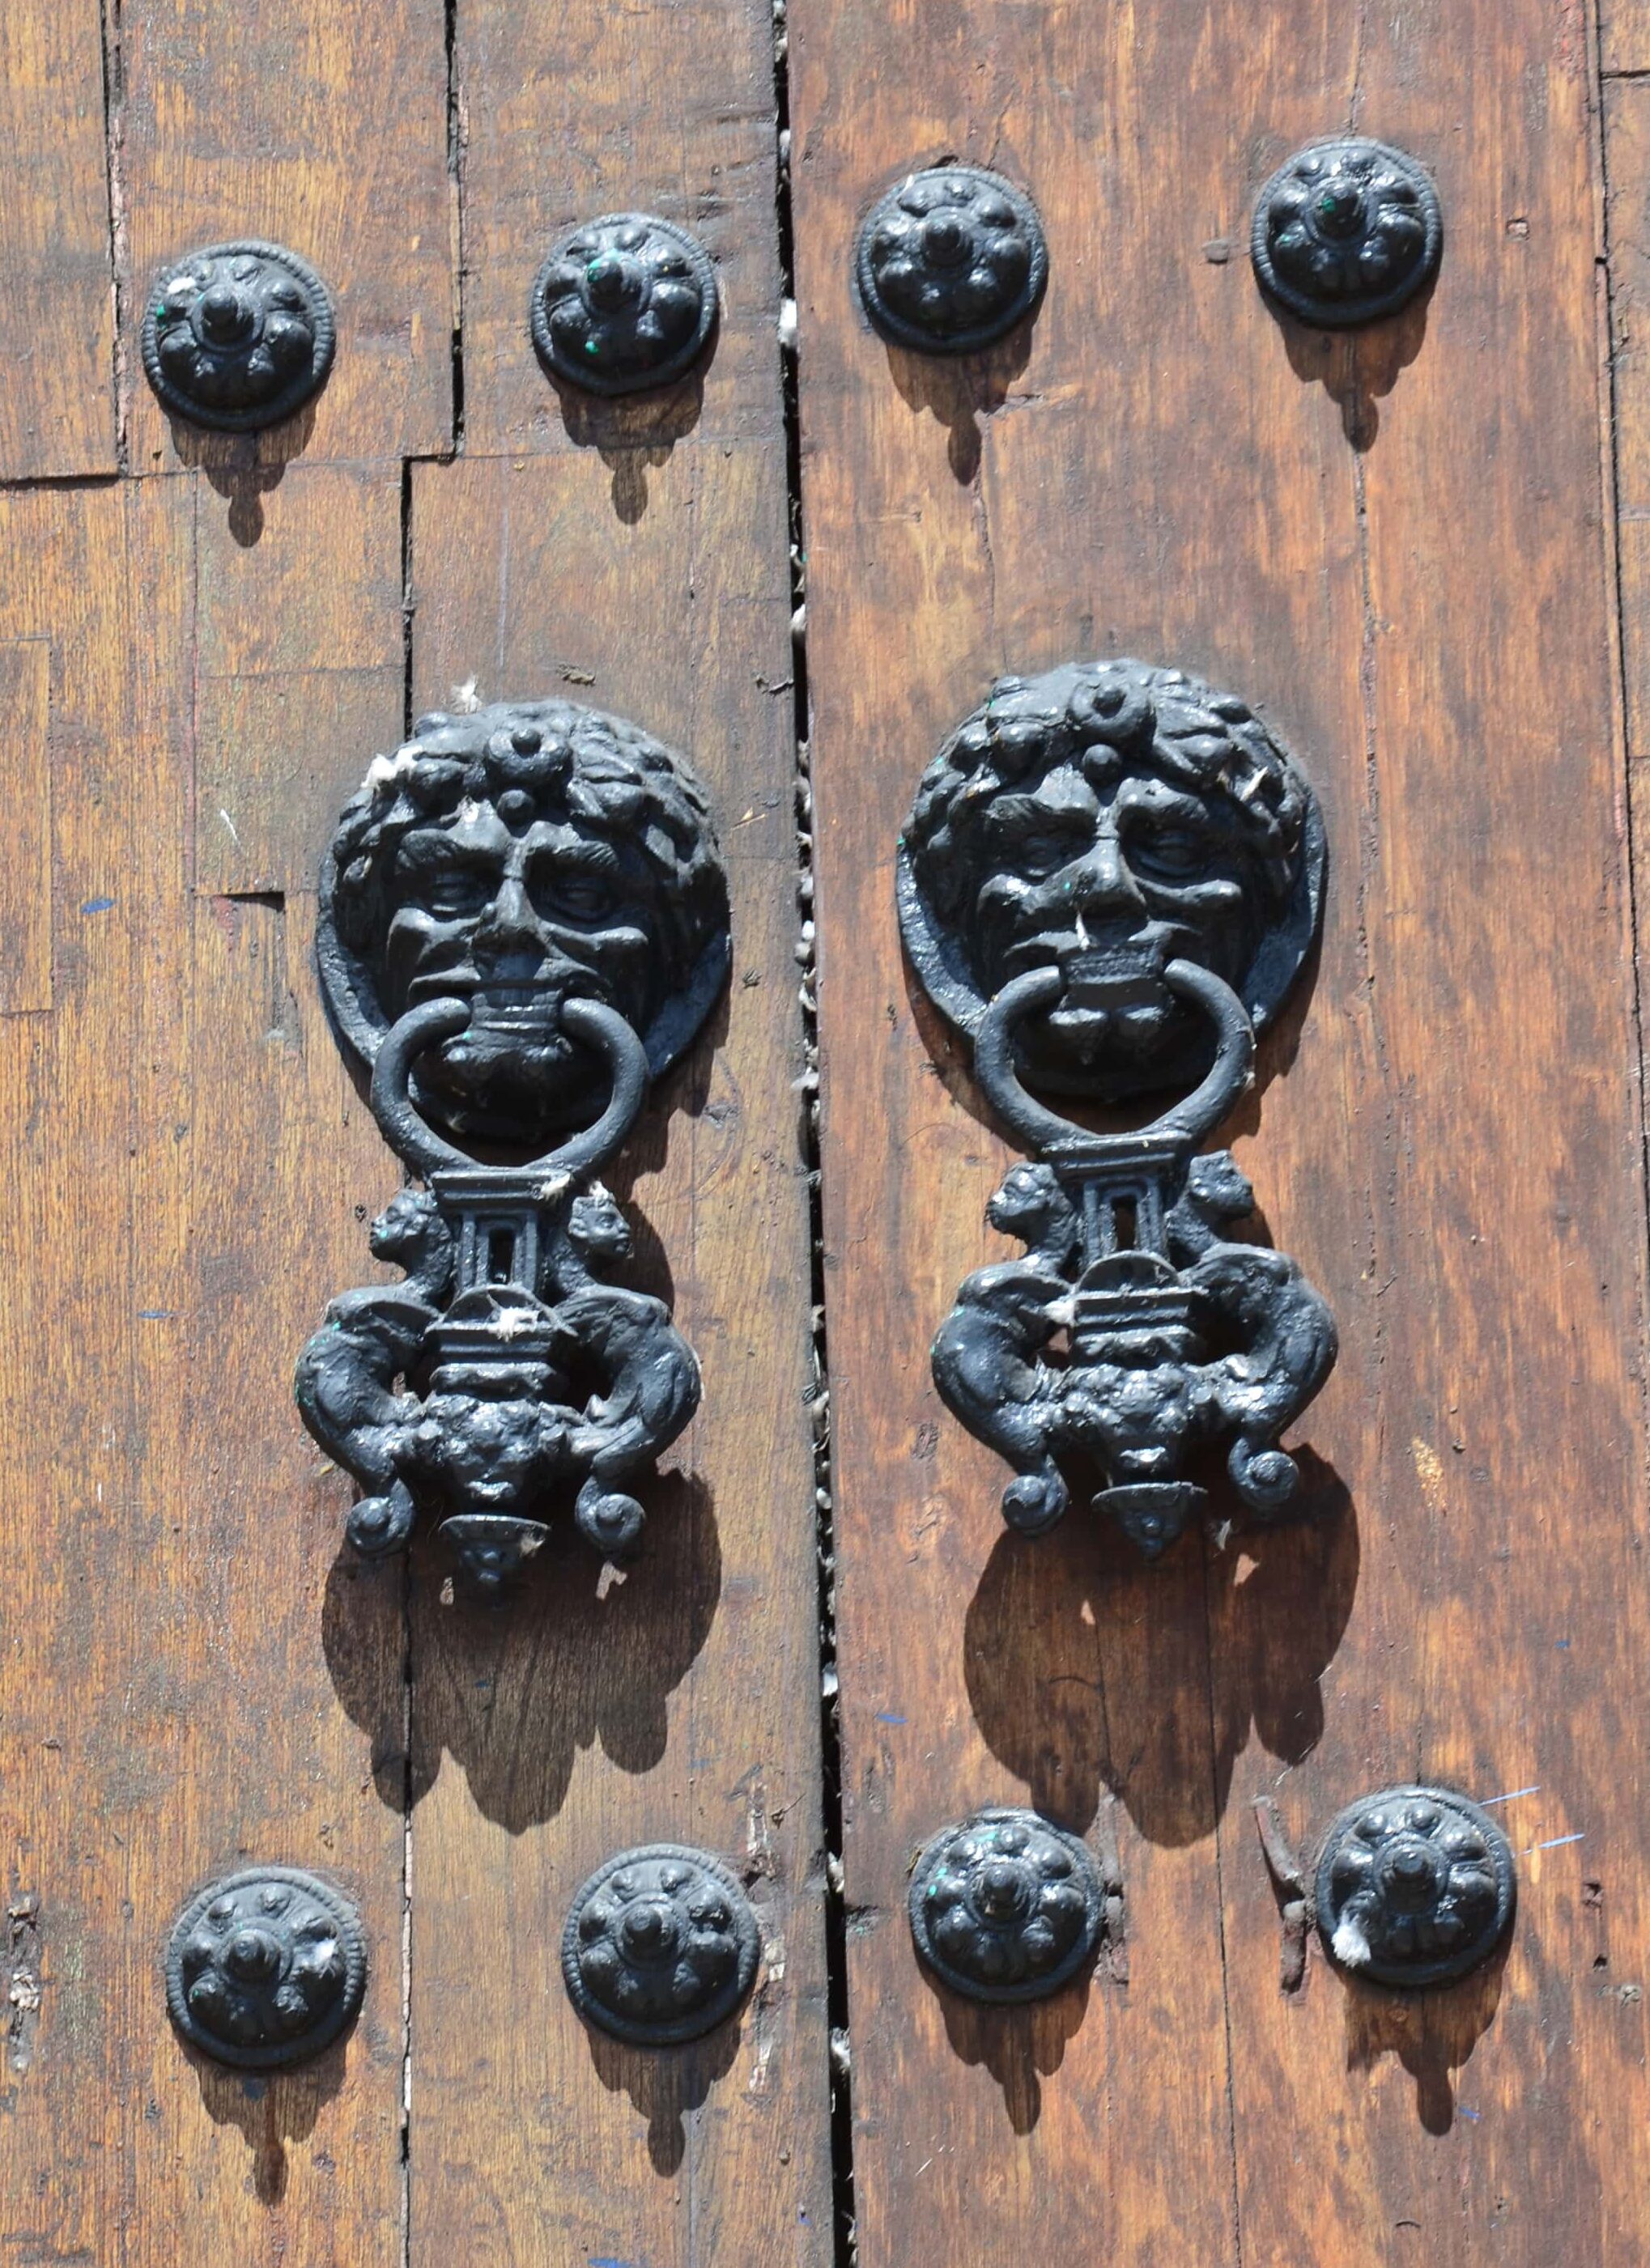 Door knockers on the Cathedral of Bogotá